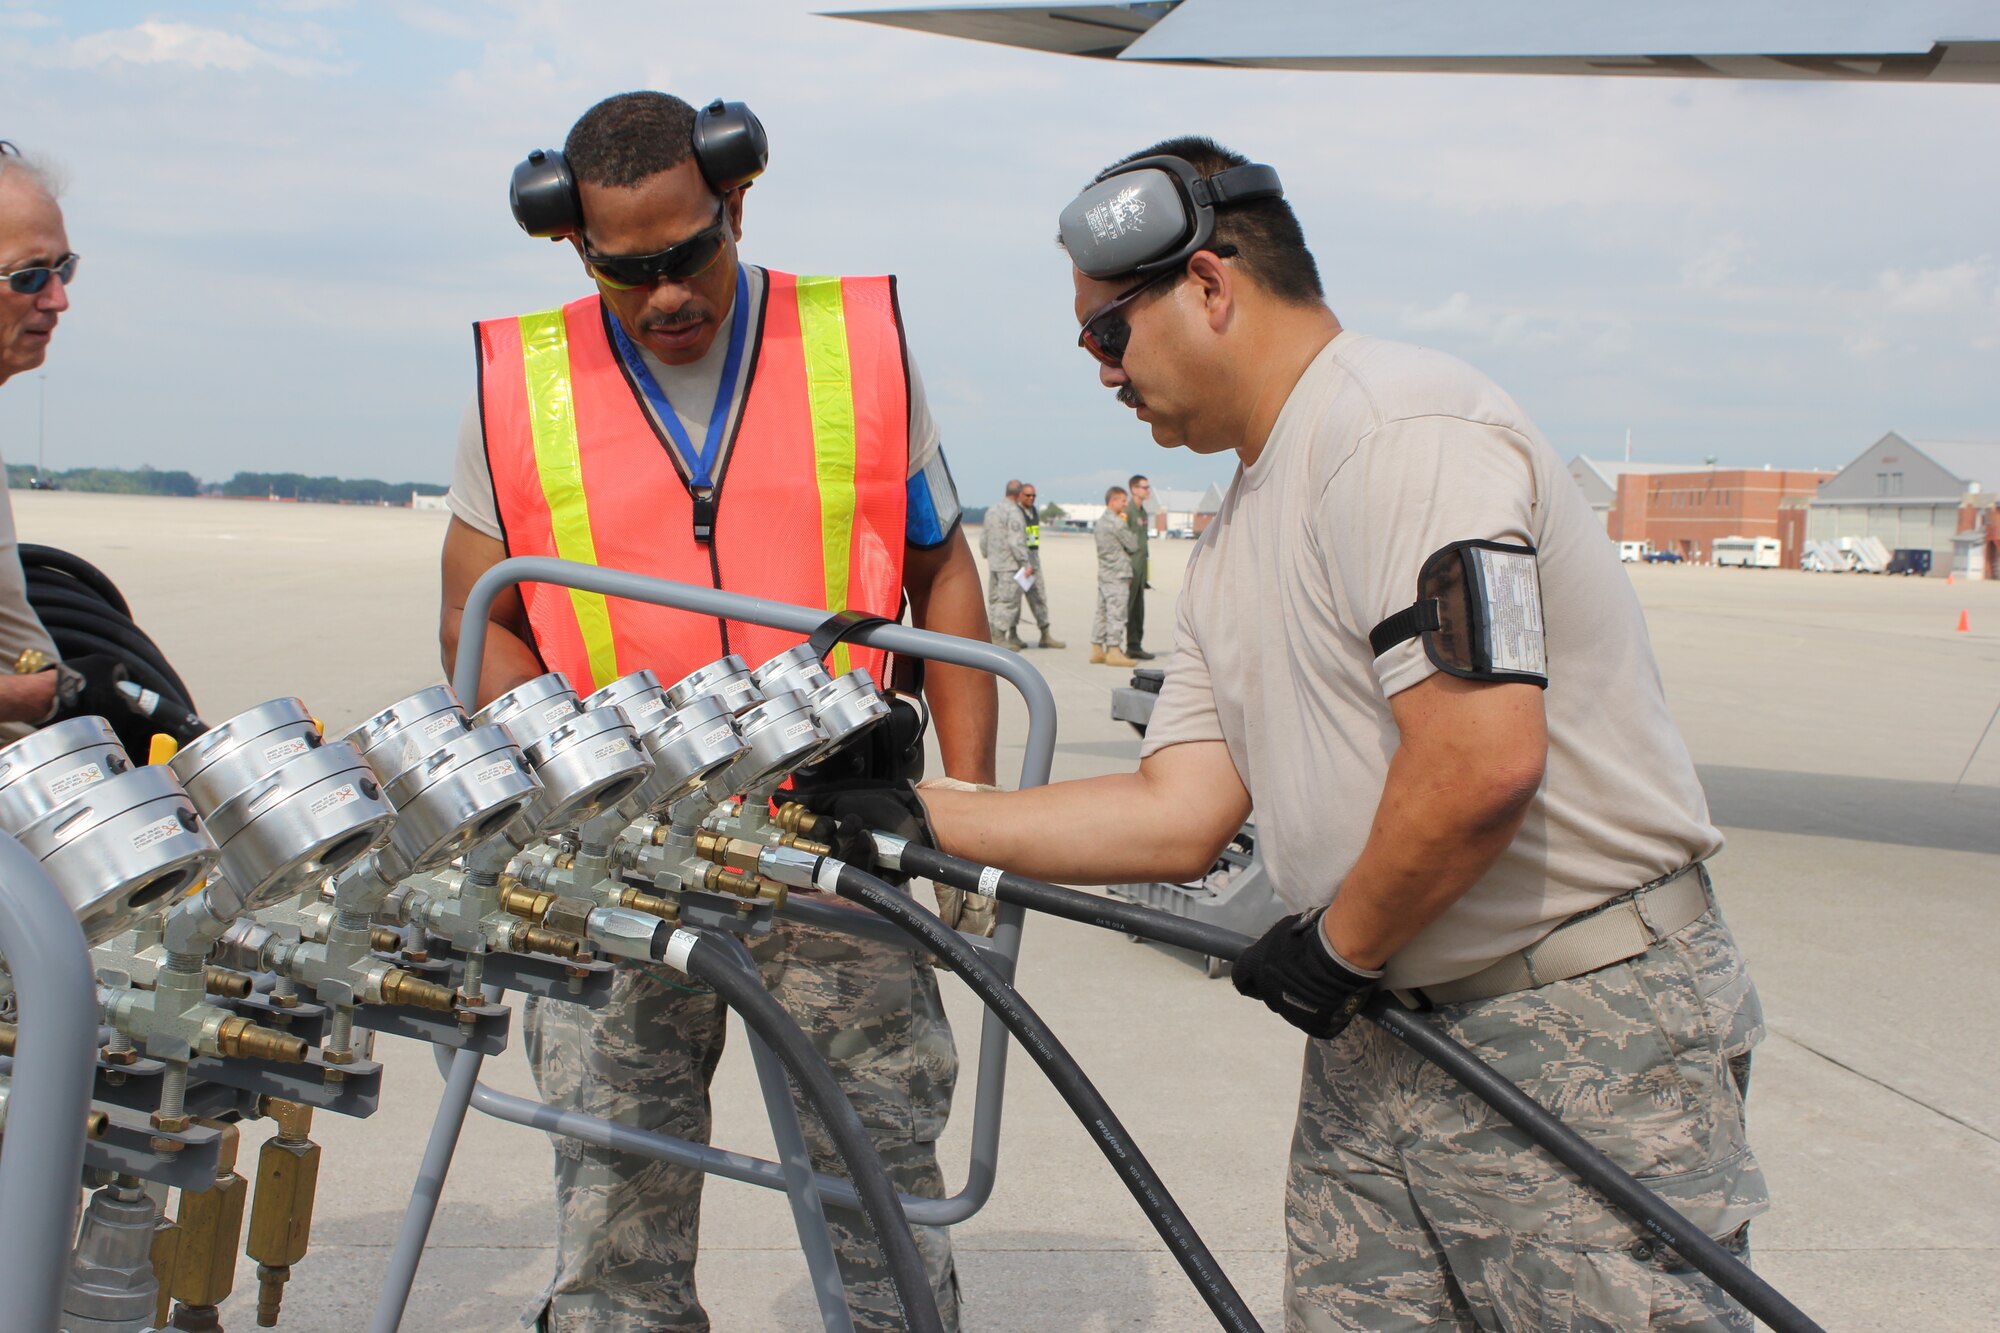 TSgt. Louis Jones and SSgt. Allen Jauw, 191st Maintenance Squadron, hook up hoses to an air regulator during a training exercise at Selfridge Air National Guard Base, Mich., Aug. 13, 20011. The 191st MXS performed an exercise in which they simulated a KC-135 Stratotanker had damaged nose gear and a crane was needed to move the aircraft to a safe location for repair. The air system was used to fill a series of bladders that could cushion the tail of aircraft while the nose of the aircraft was lifted by a crane. (USAF photo by TSgt. Dan Heaton)